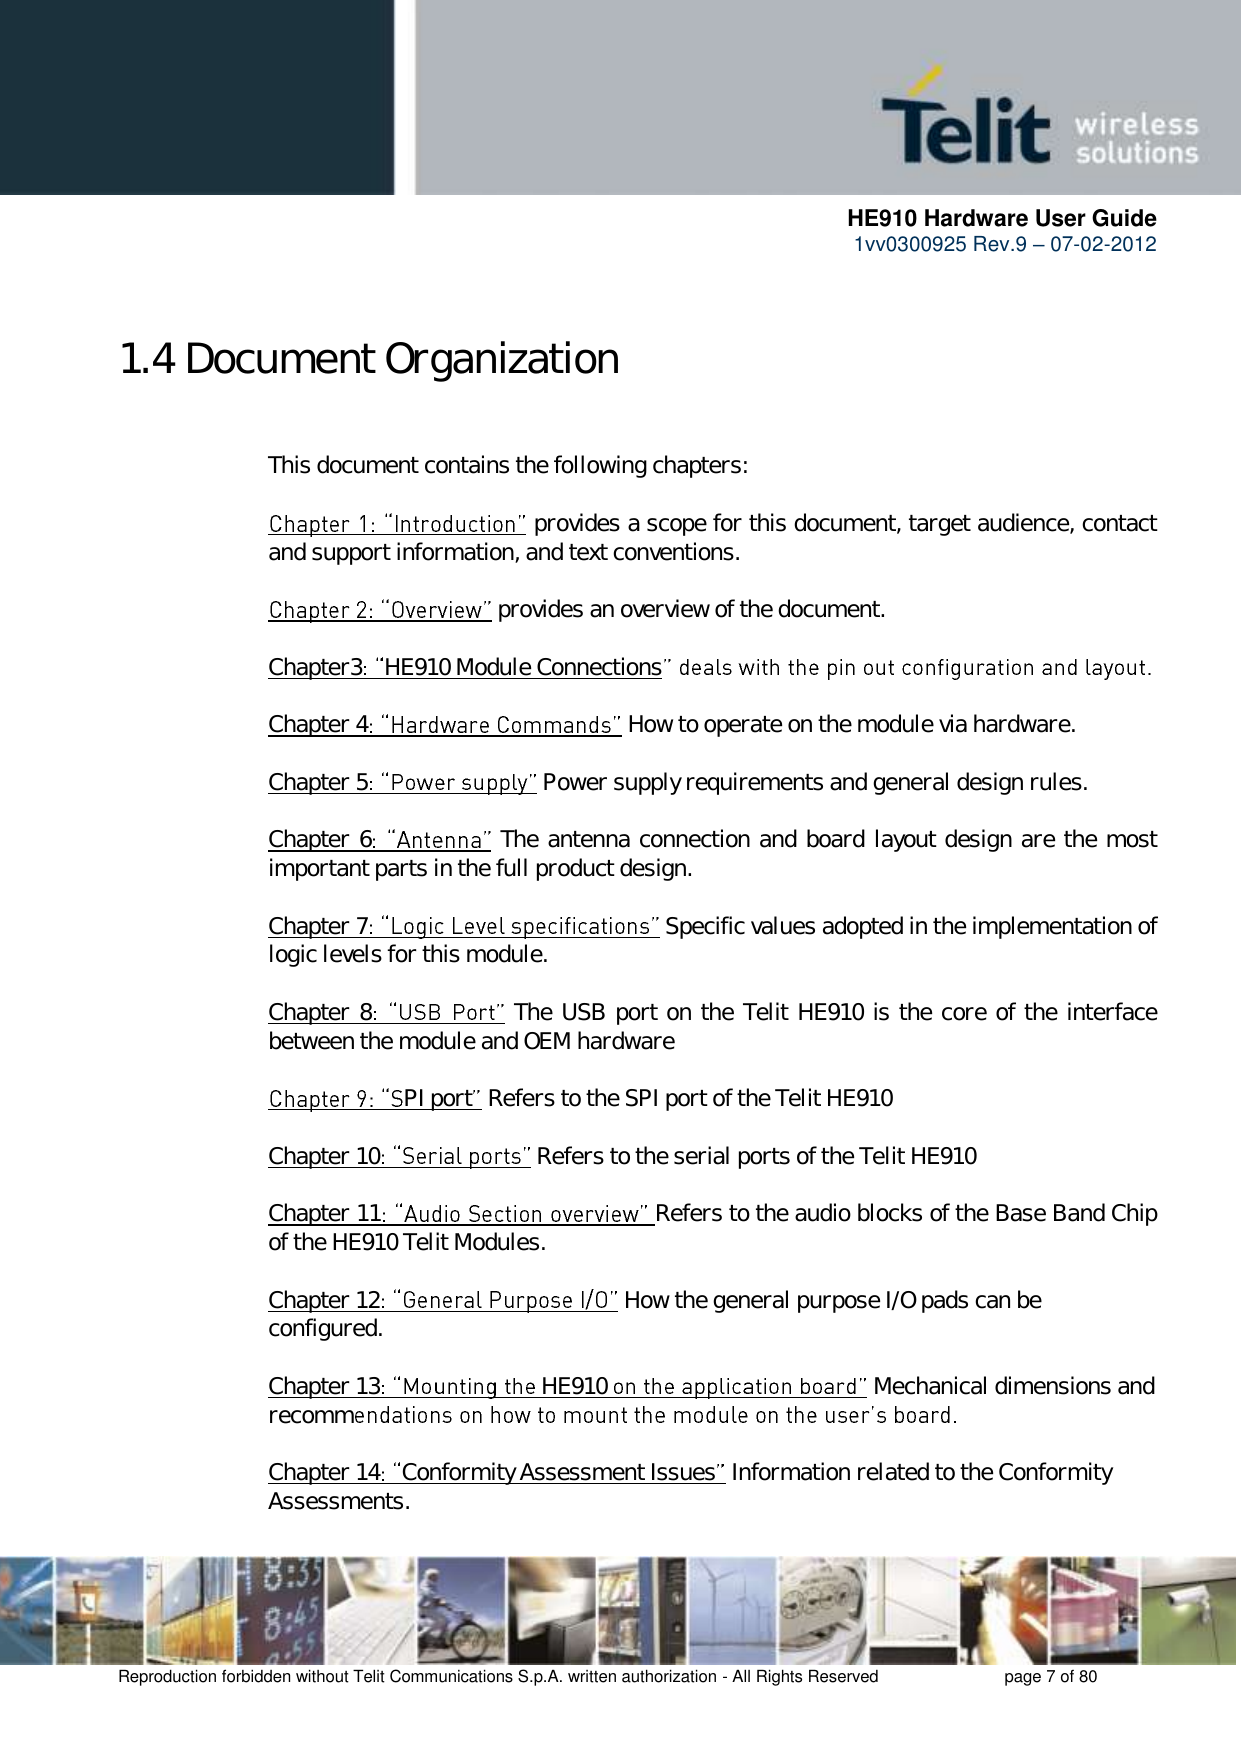      HE910 Hardware User Guide 1vv0300925 Rev.9 – 07-02-2012    Reproduction forbidden without Telit Communications S.p.A. written authorization - All Rights Reserved    page 7 of 80   1.4 Document Organization  This document contains the following chapters:   provides a scope for this document, target audience, contact and support information, and text conventions.   provides an overview of the document.  Chapter3 HE910 Module Connections   Chapter 4  How to operate on the module via hardware.  Chapter 5  Power supply requirements and general design rules.  Chapter 6  The antenna connection and board layout design are the most important parts in the full product design.  Chapter 7  Specific values adopted in the implementation of logic levels for this module.            Chapter 8  The USB port on the Telit HE910 is the core of the interface between the module and OEM hardware  PI port  Refers to the SPI port of the Telit HE910   Chapter 10  Refers to the serial ports of the Telit HE910   Chapter 11  Refers to the audio blocks of the Base Band Chip of the HE910 Telit Modules.  Chapter 12  How the general purpose I/O pads can be configured.  Chapter 13 HE910   Mechanical dimensions and recomm   Chapter 14 Conformity Assessment Issues  Information related to the Conformity Assessments.  